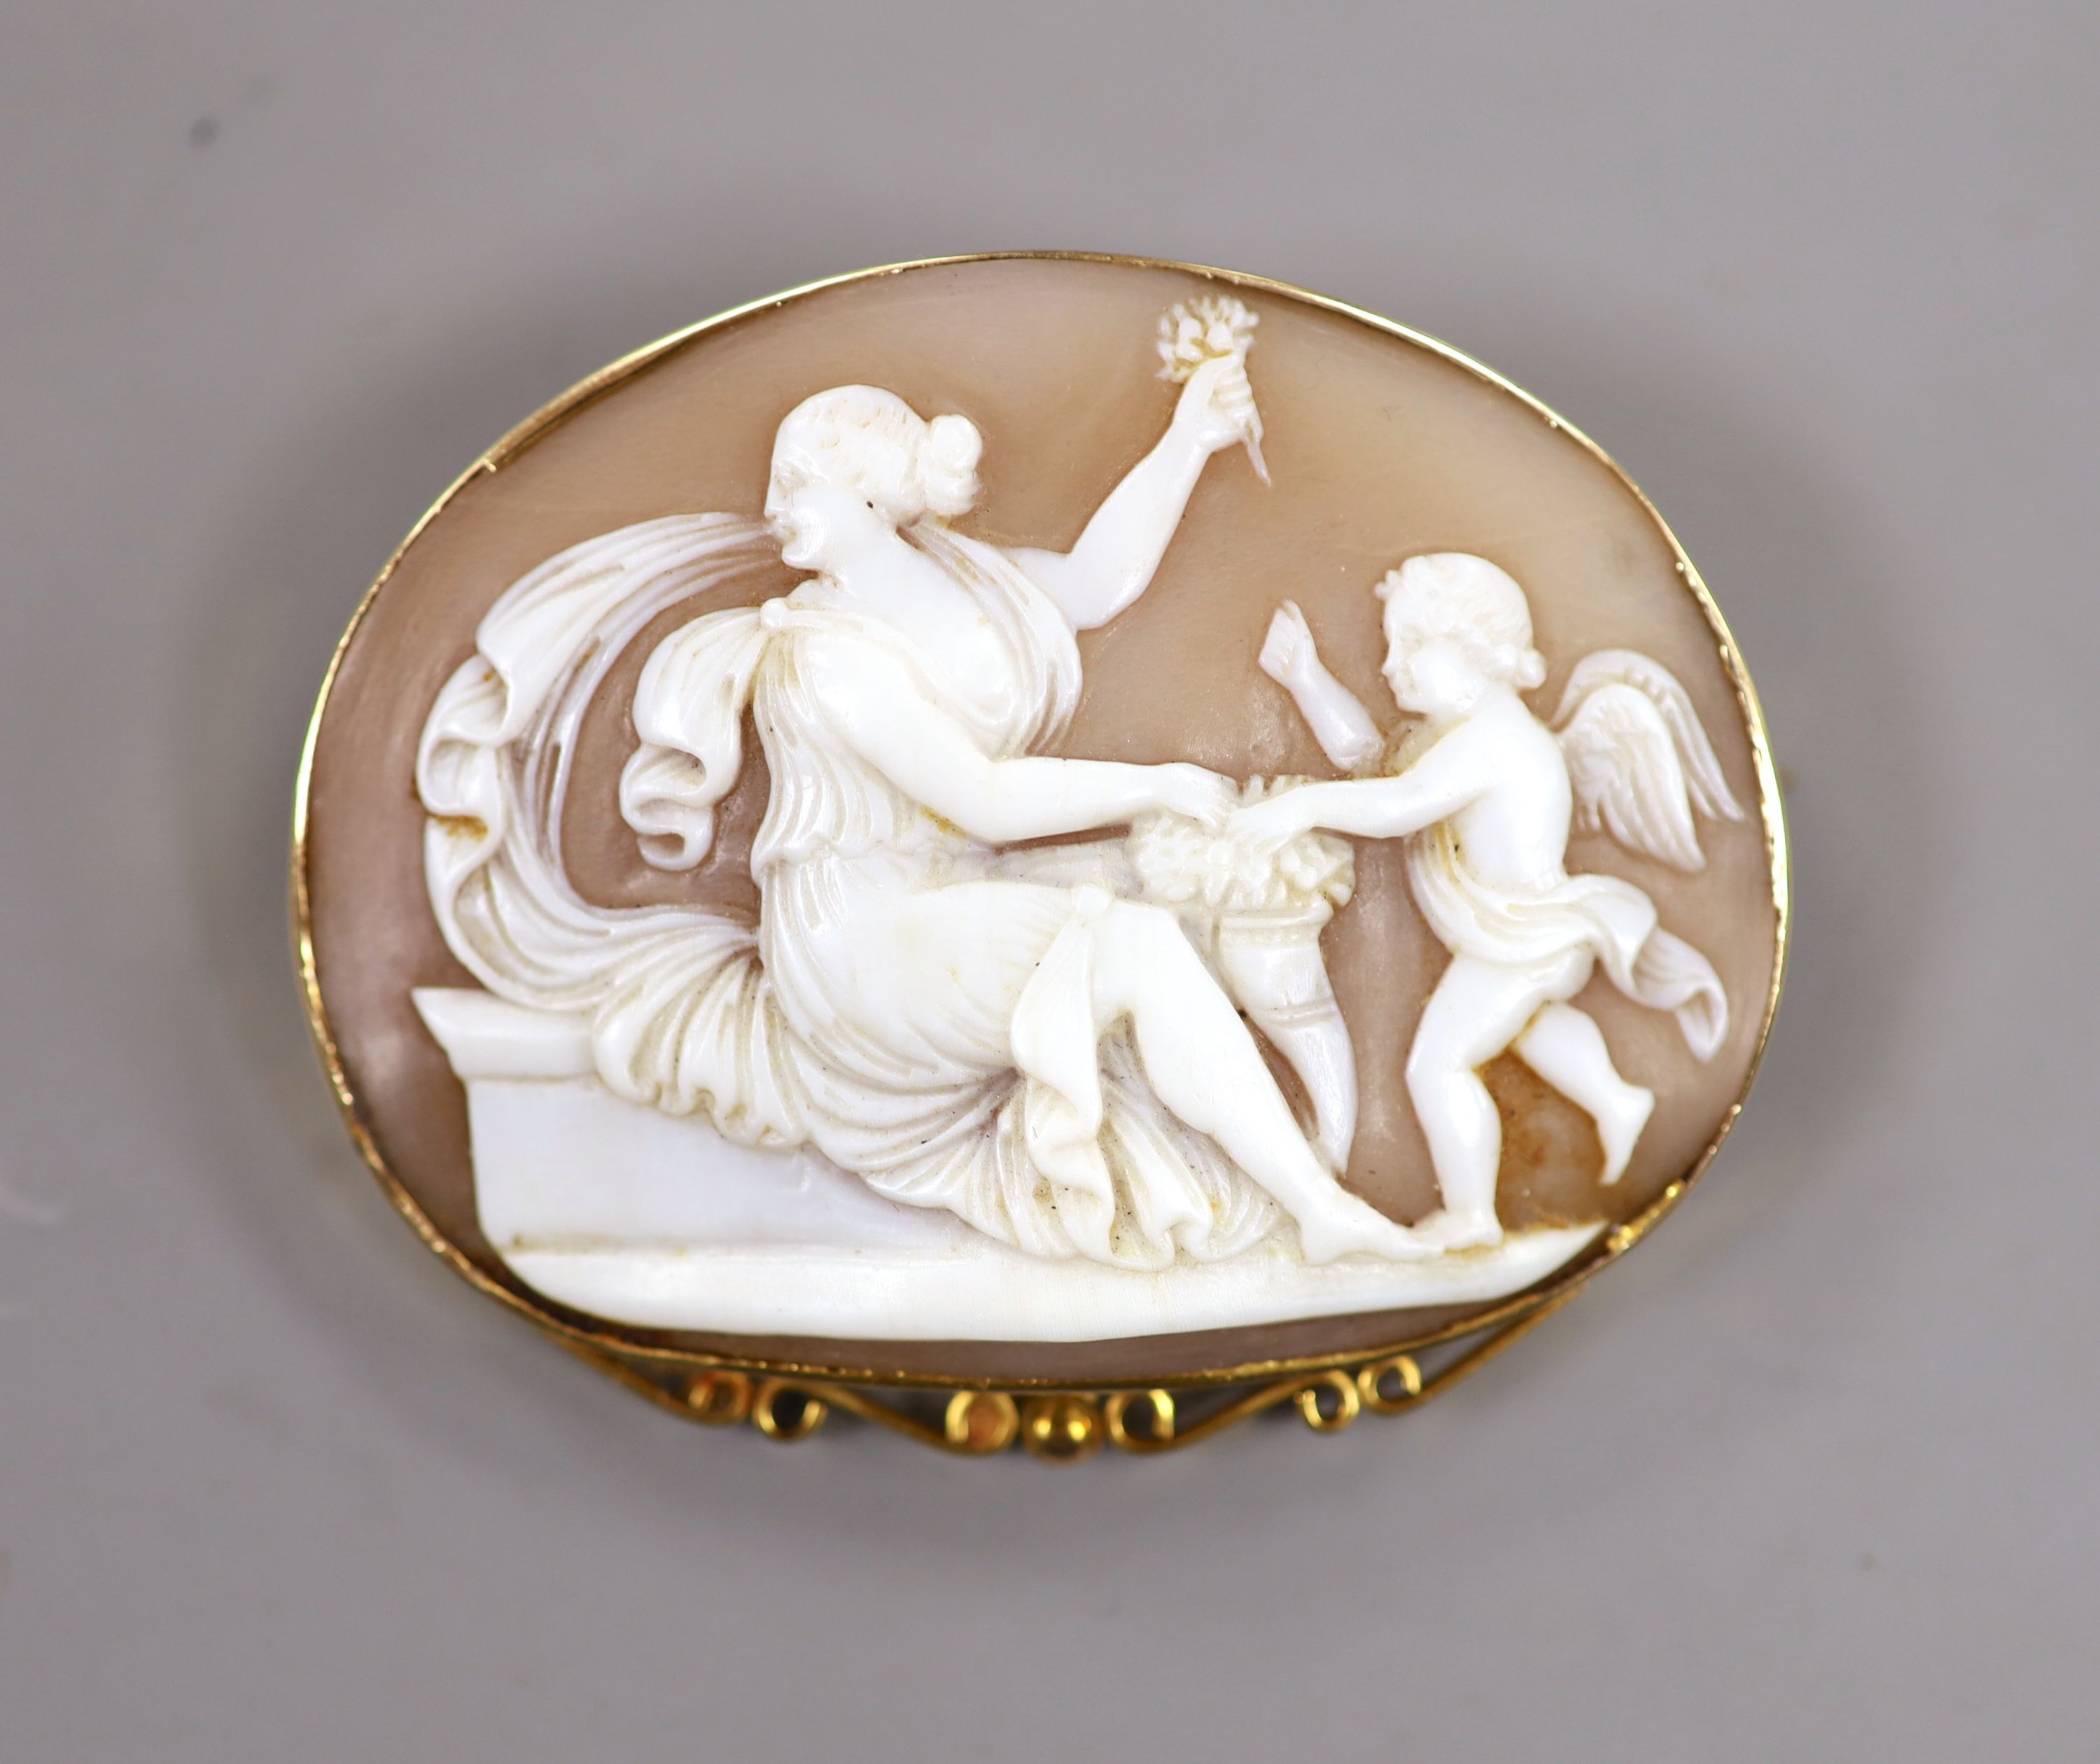 A 9ct mounted oval cameo brooch, carved with Cupid & Psyche, 60mm, gross weight 17.9 grams.